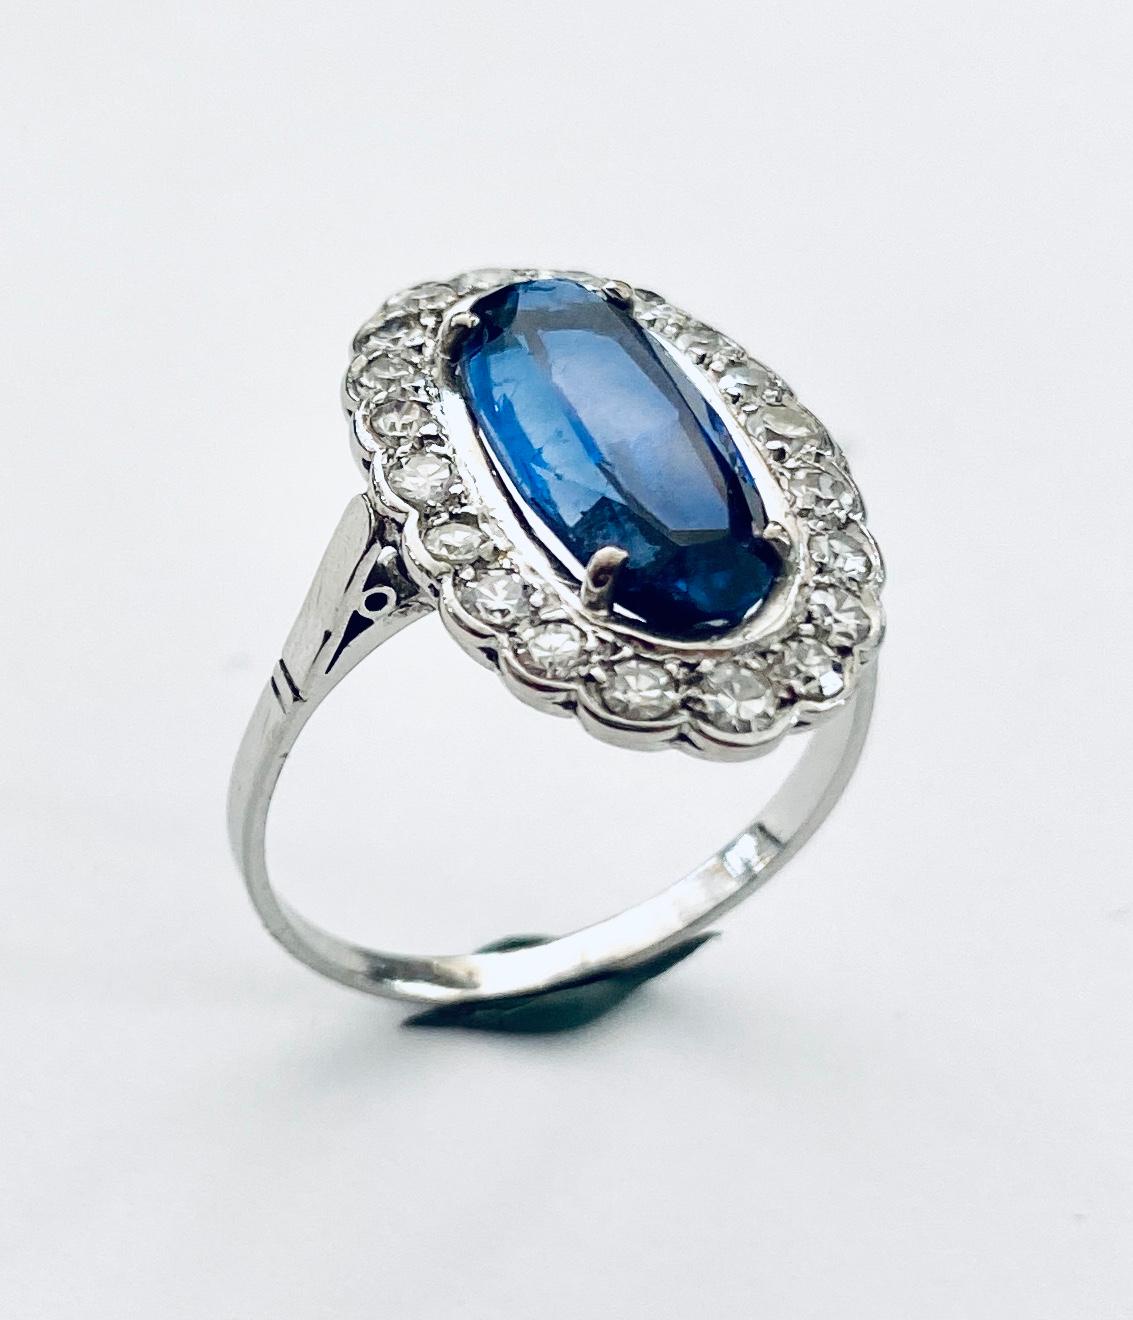 - One (1) 950 / - Platinum ring, model oval entourage
- Set with 20 8 side cut diamonds weighing: 0.66 ct
- 1 oval cut synthetic sapphire of 3.30 ct.
- France / England ca 1930
- Weight: 4.63 grams size: 18+ (57.5 )

Synthetic stones in